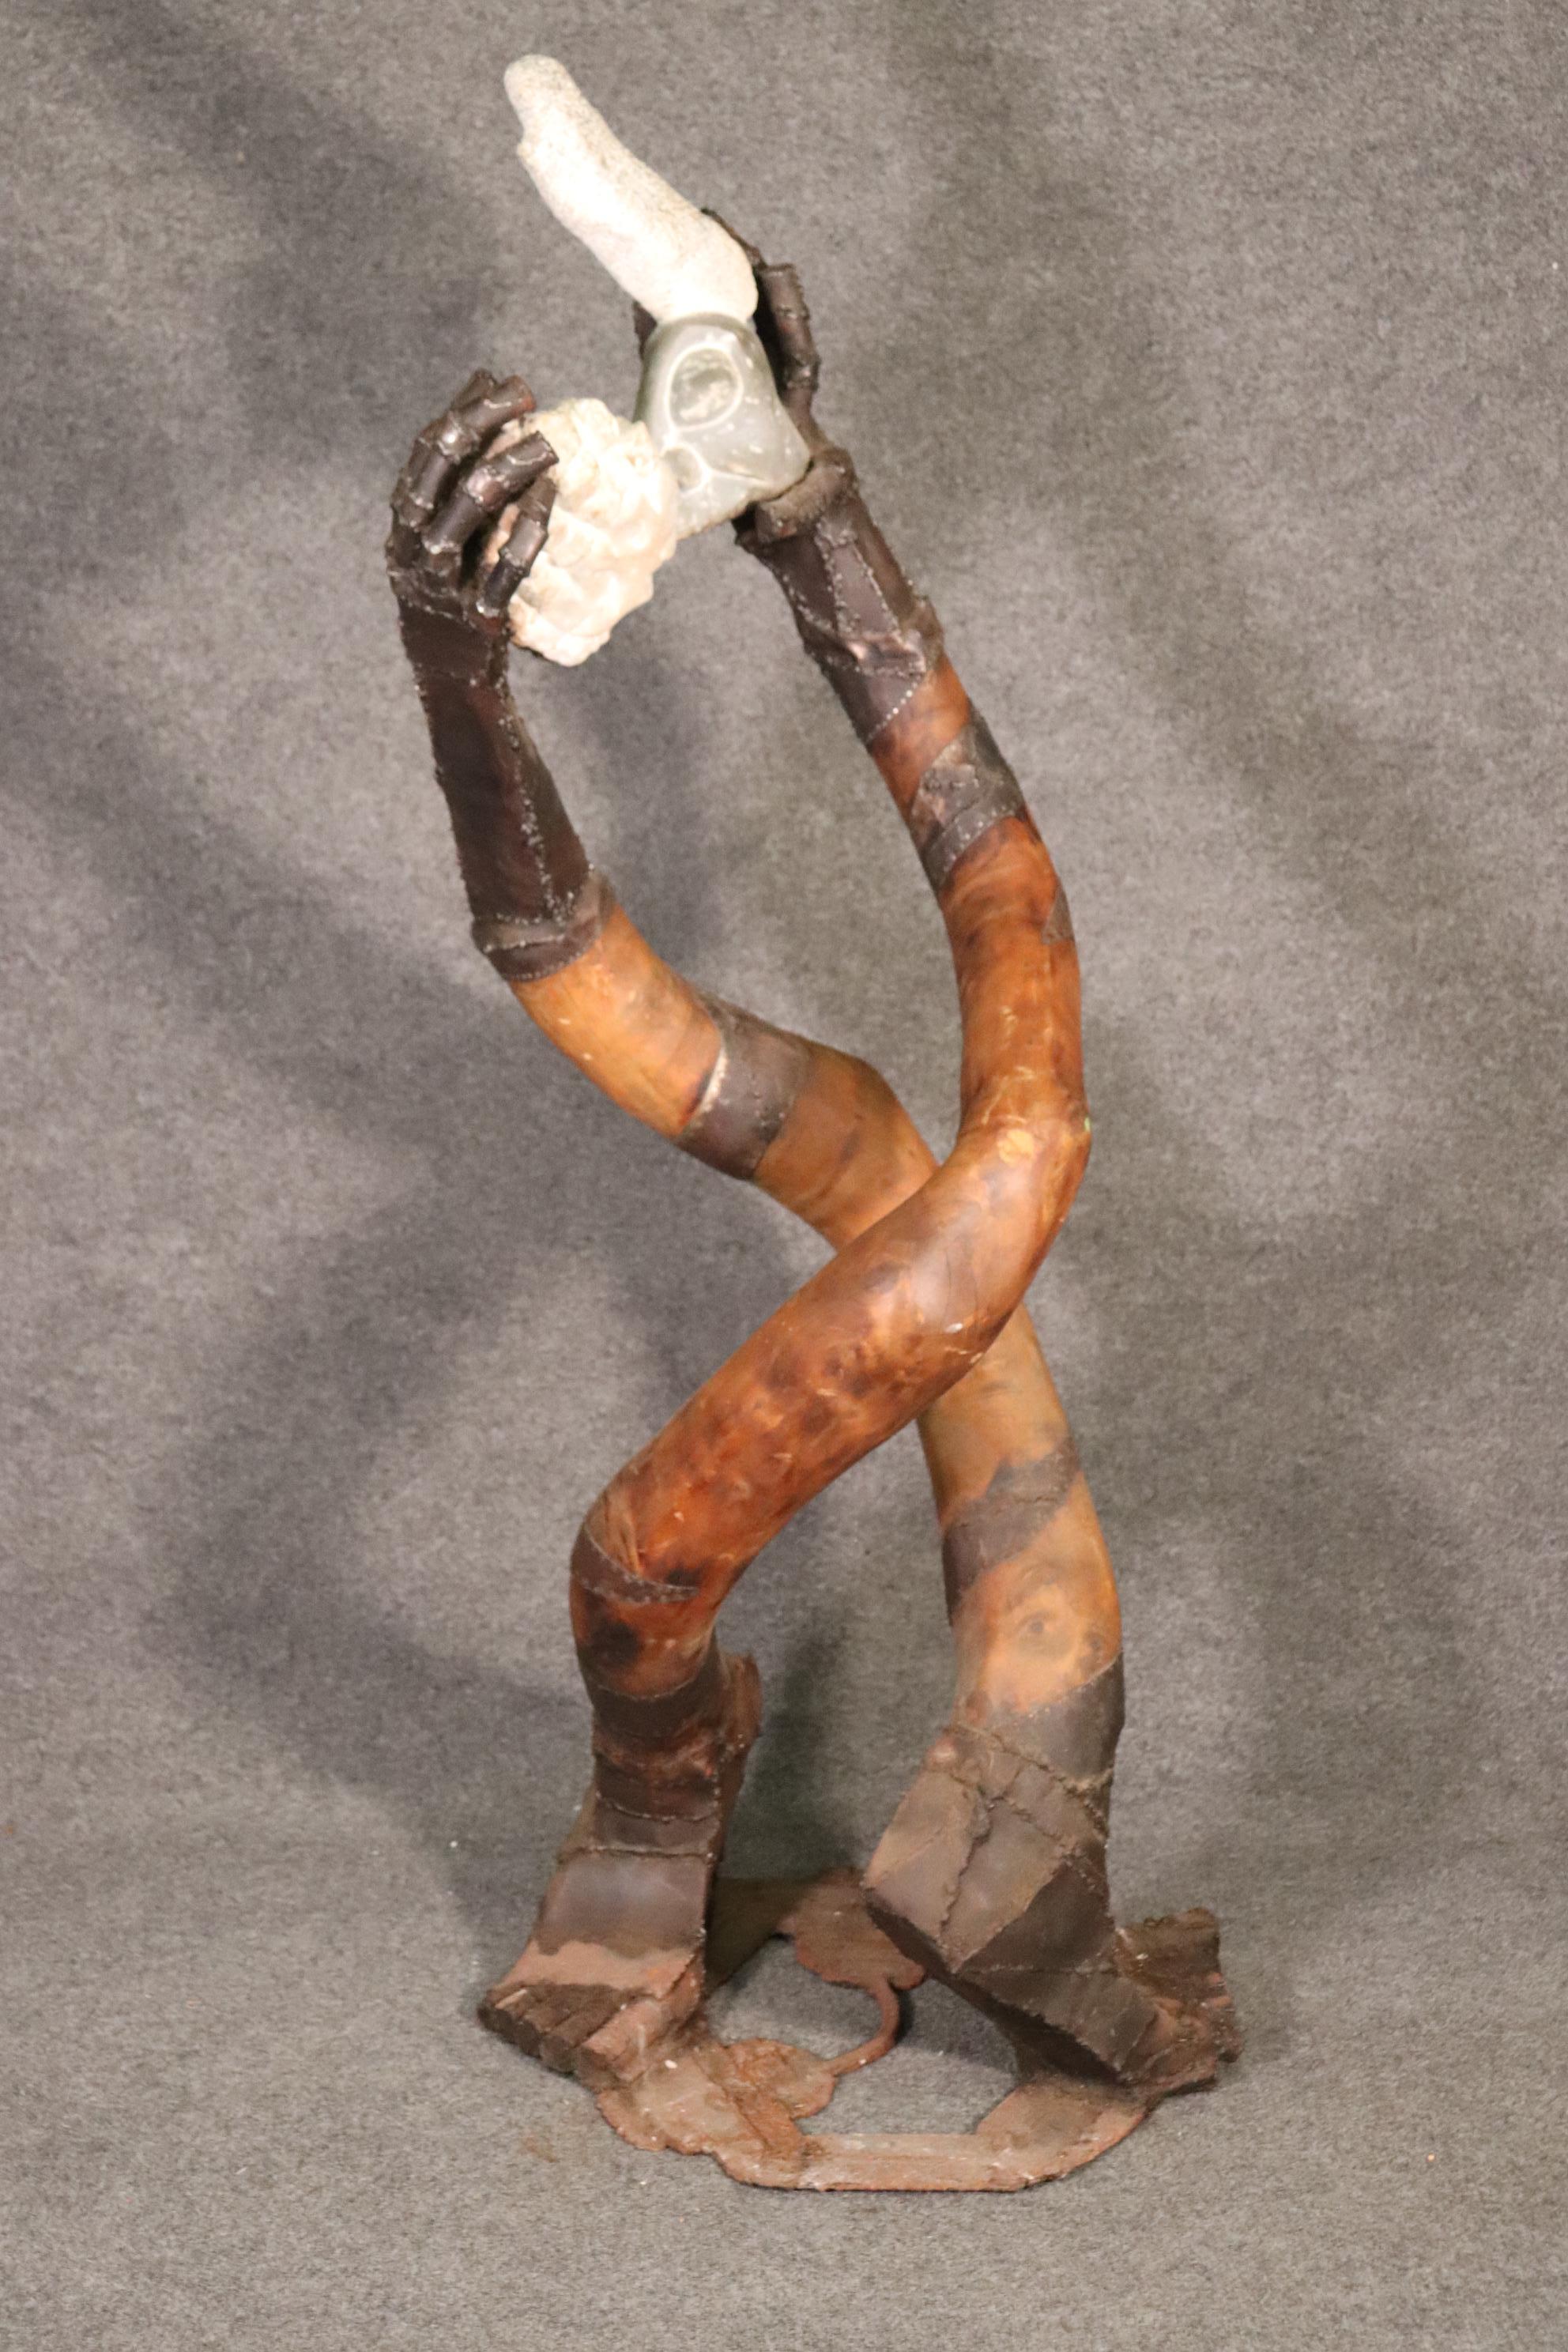 Dimensions- H: 64 1/2in W: 27in D: 26in
This is an exceptional South African sculpture is titled 